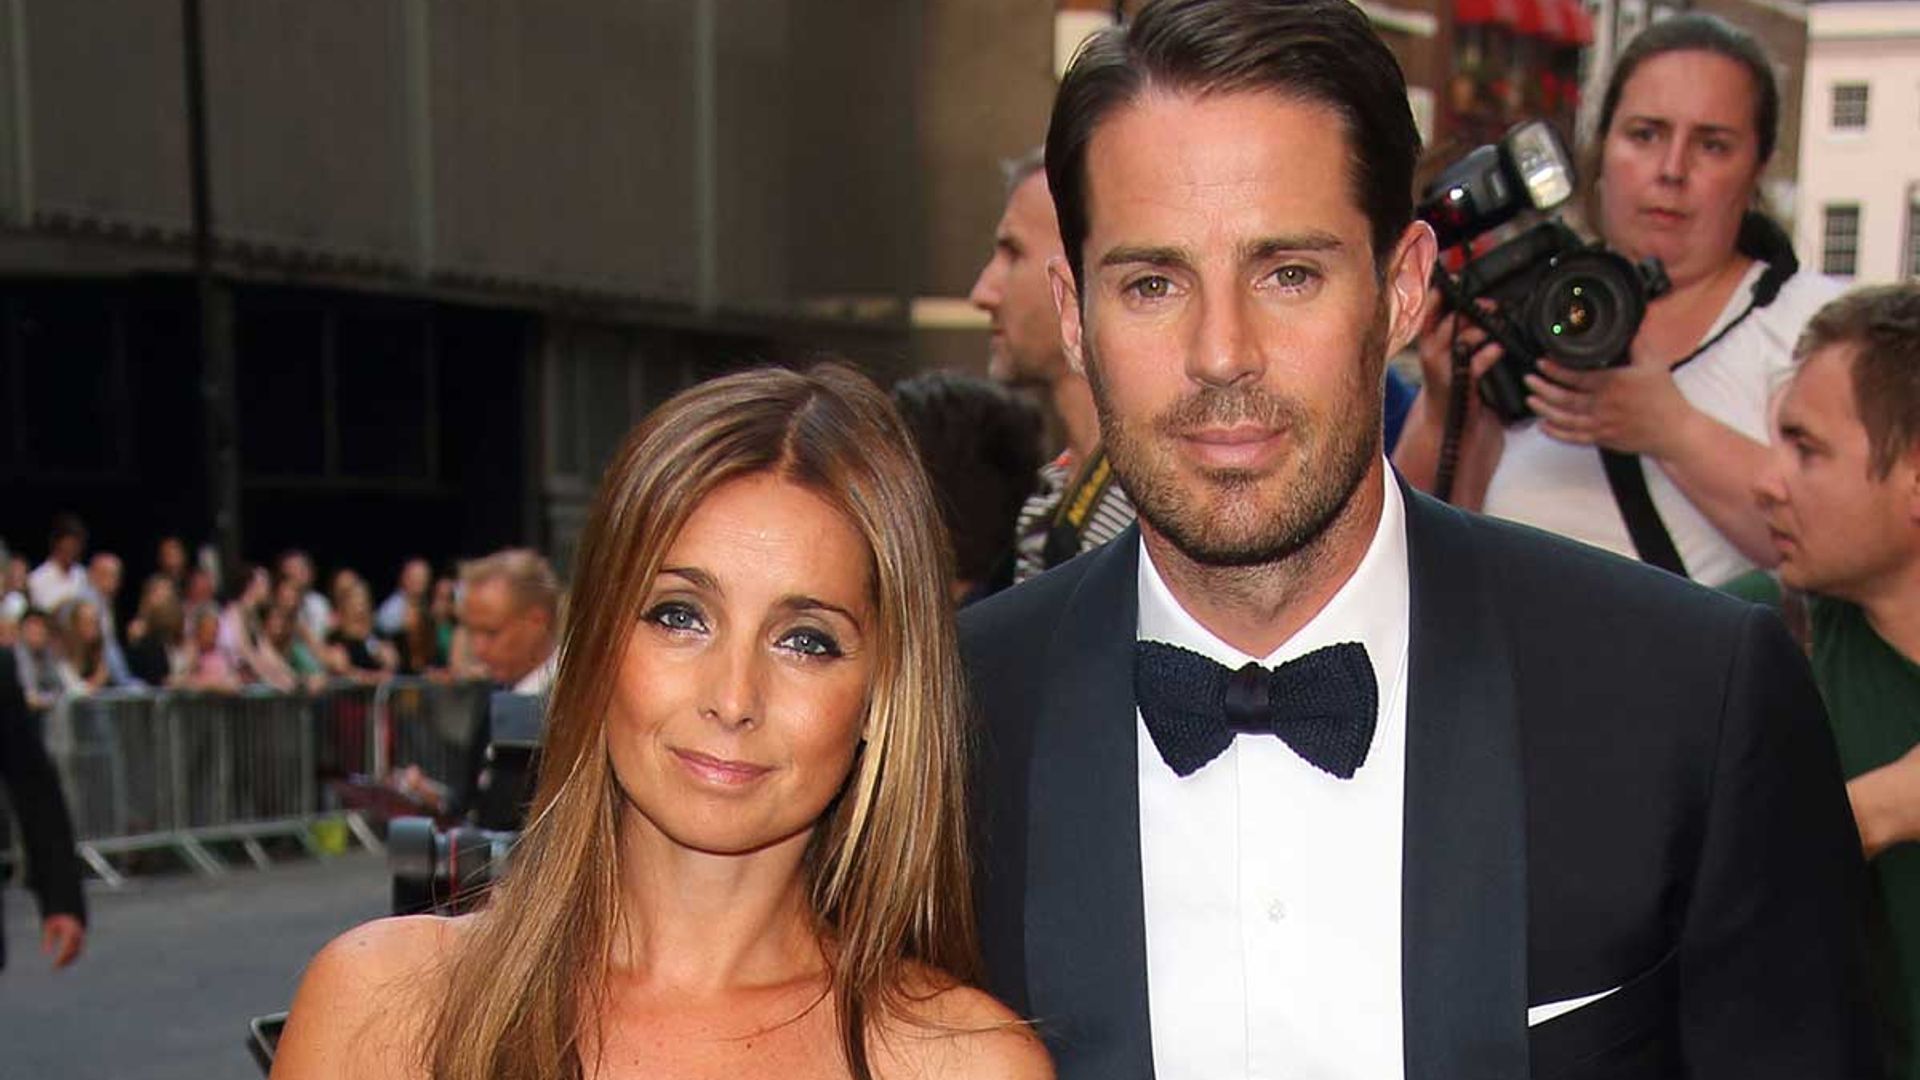 Louise Redknapp Opens Up About Family Life With Jamie Redknapp After Split Hello